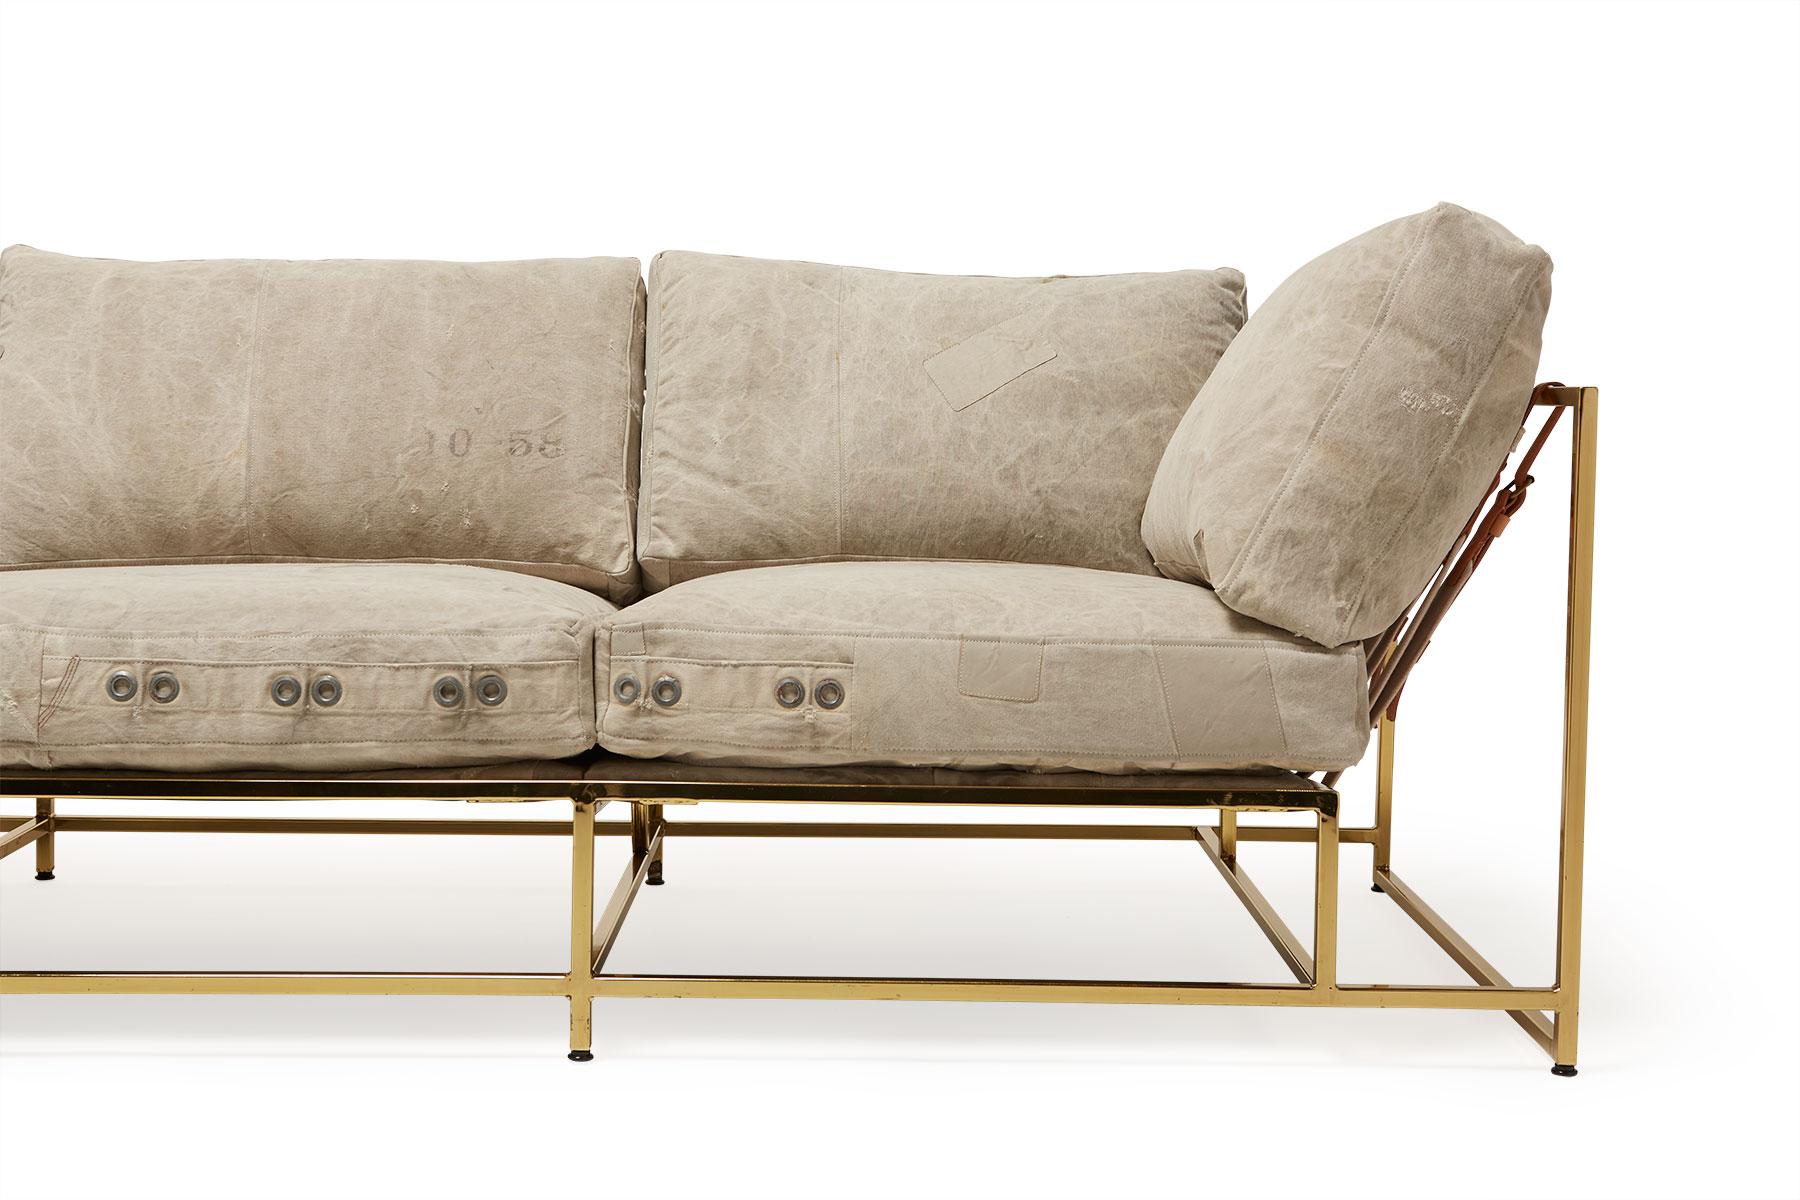 Welded US Mailbag Canvas & Polished Brass Sofa For Sale